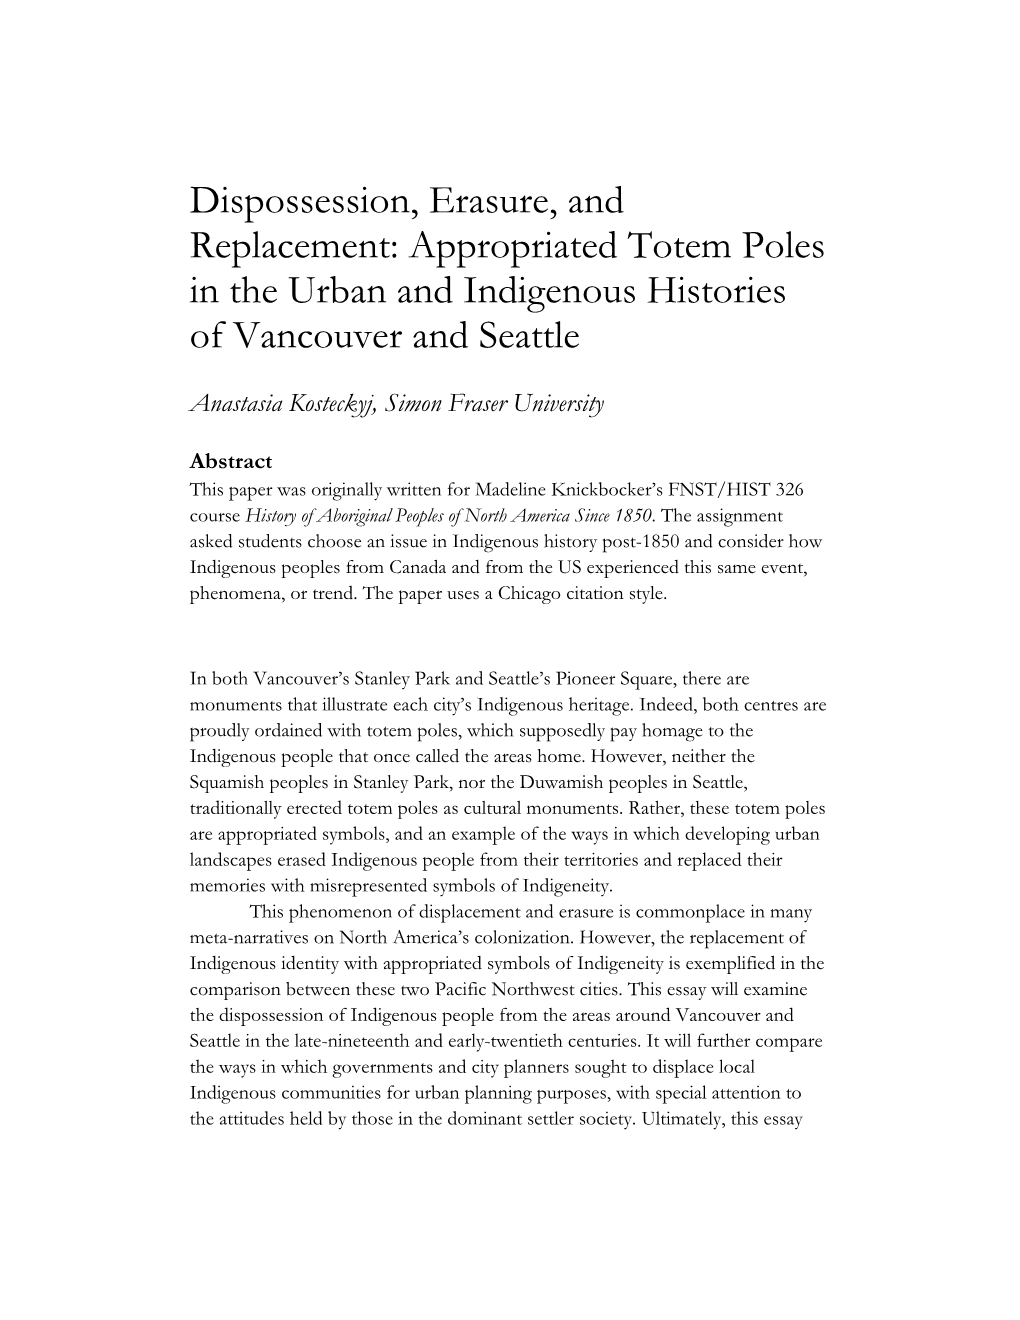 Dispossession, Erasure, and Replacement: Appropriated Totem Poles in the Urban and Indigenous Histories of Vancouver and Seattle